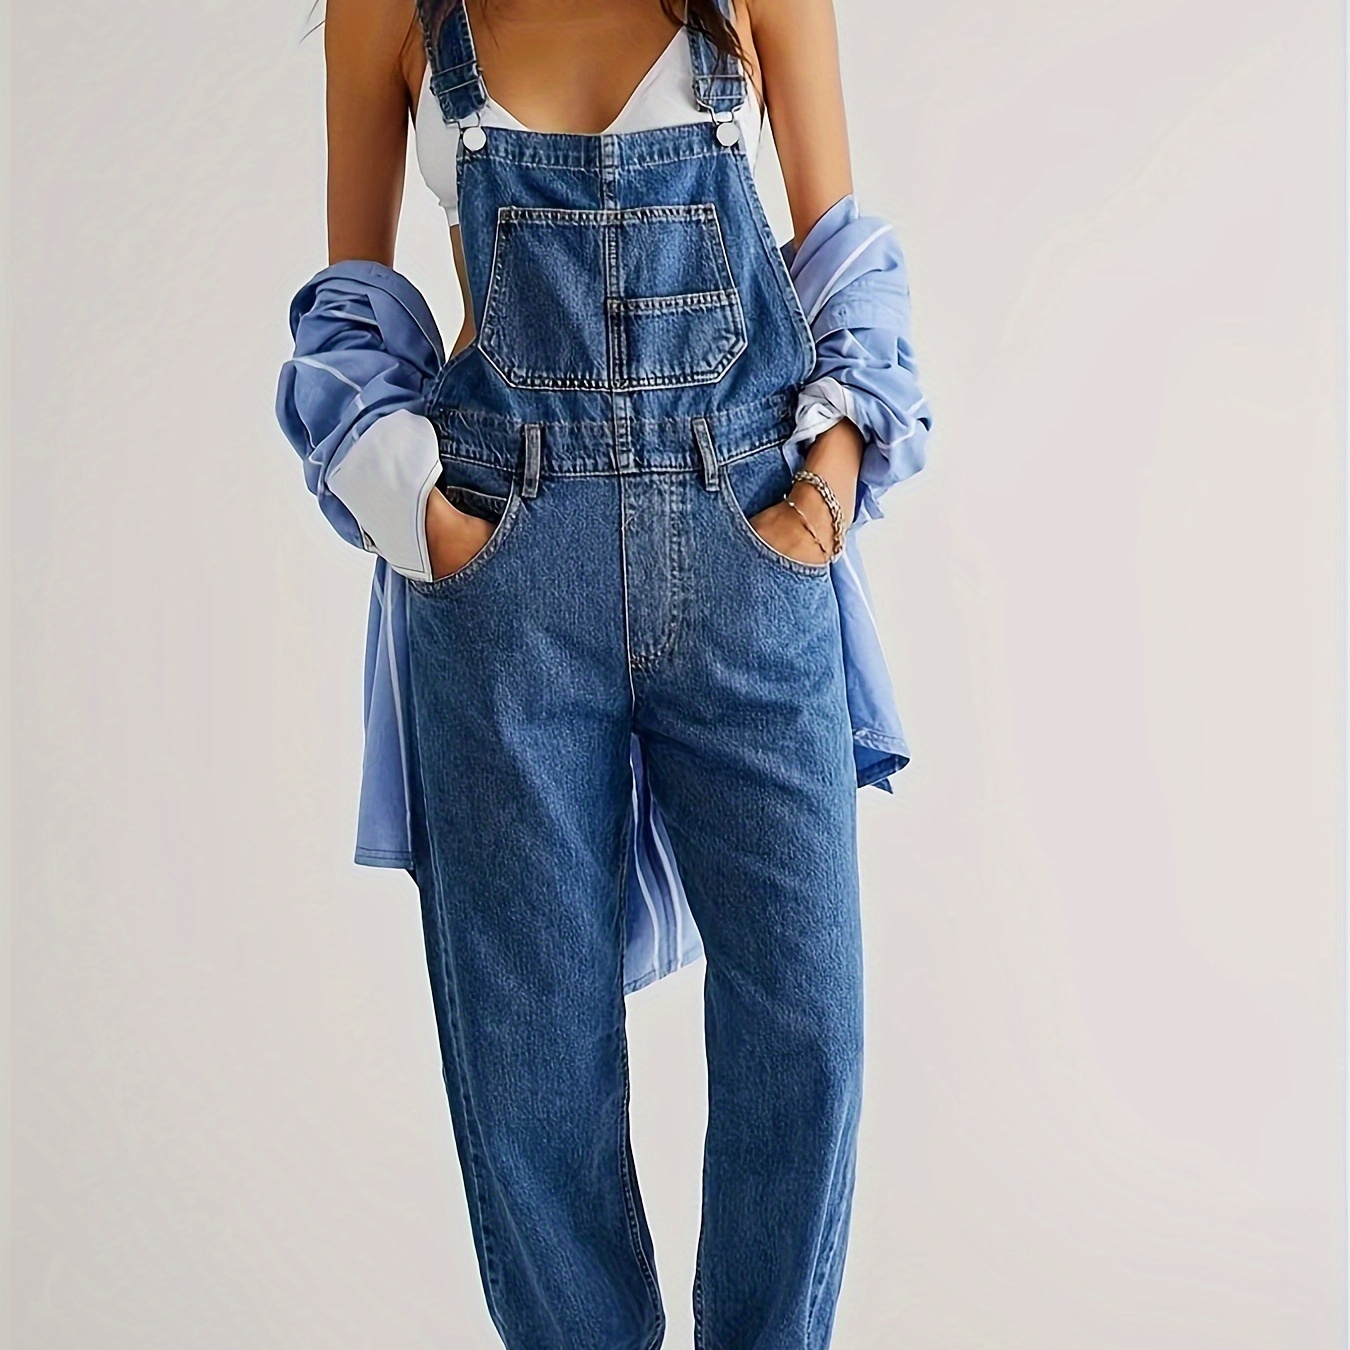 

Women's Fashion Denim Overalls, Casual Style, Non-stretch, Relaxed Fit - Classic Blue Jean Jumpsuit Dungarees With Pockets For Fall